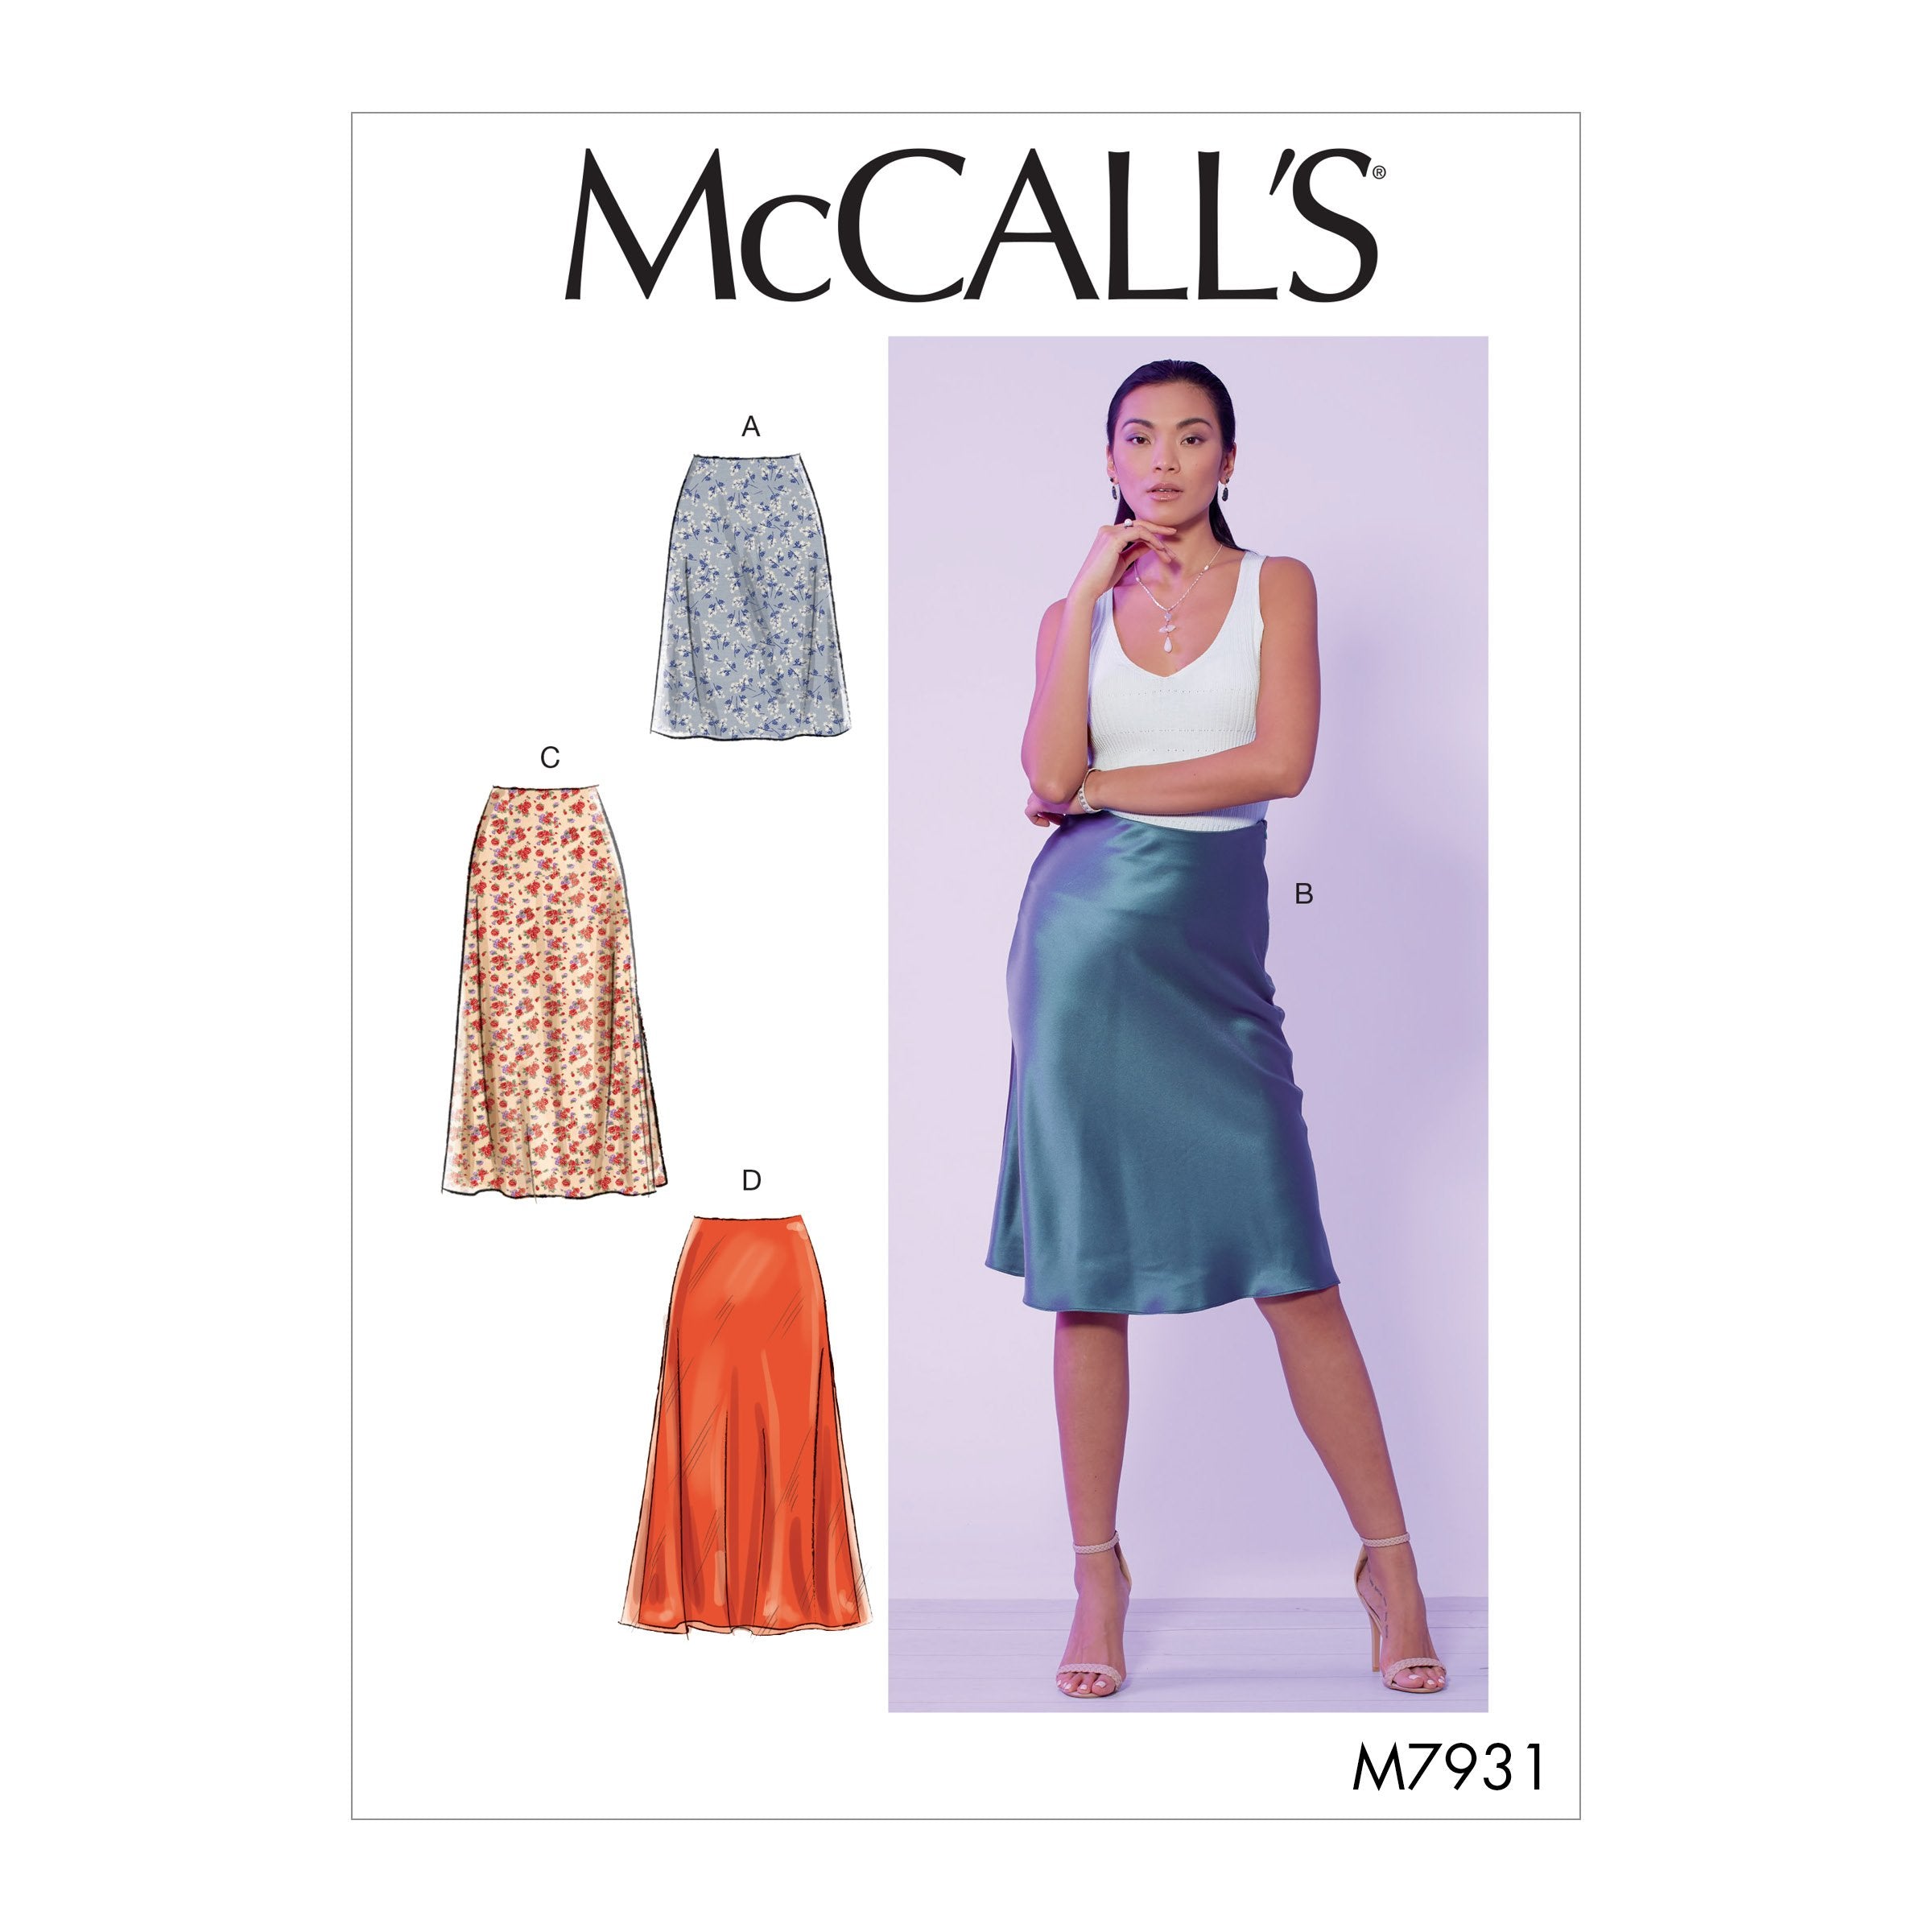 McCall's 7931 Misses' Skirts pattern from Jaycotts Sewing Supplies